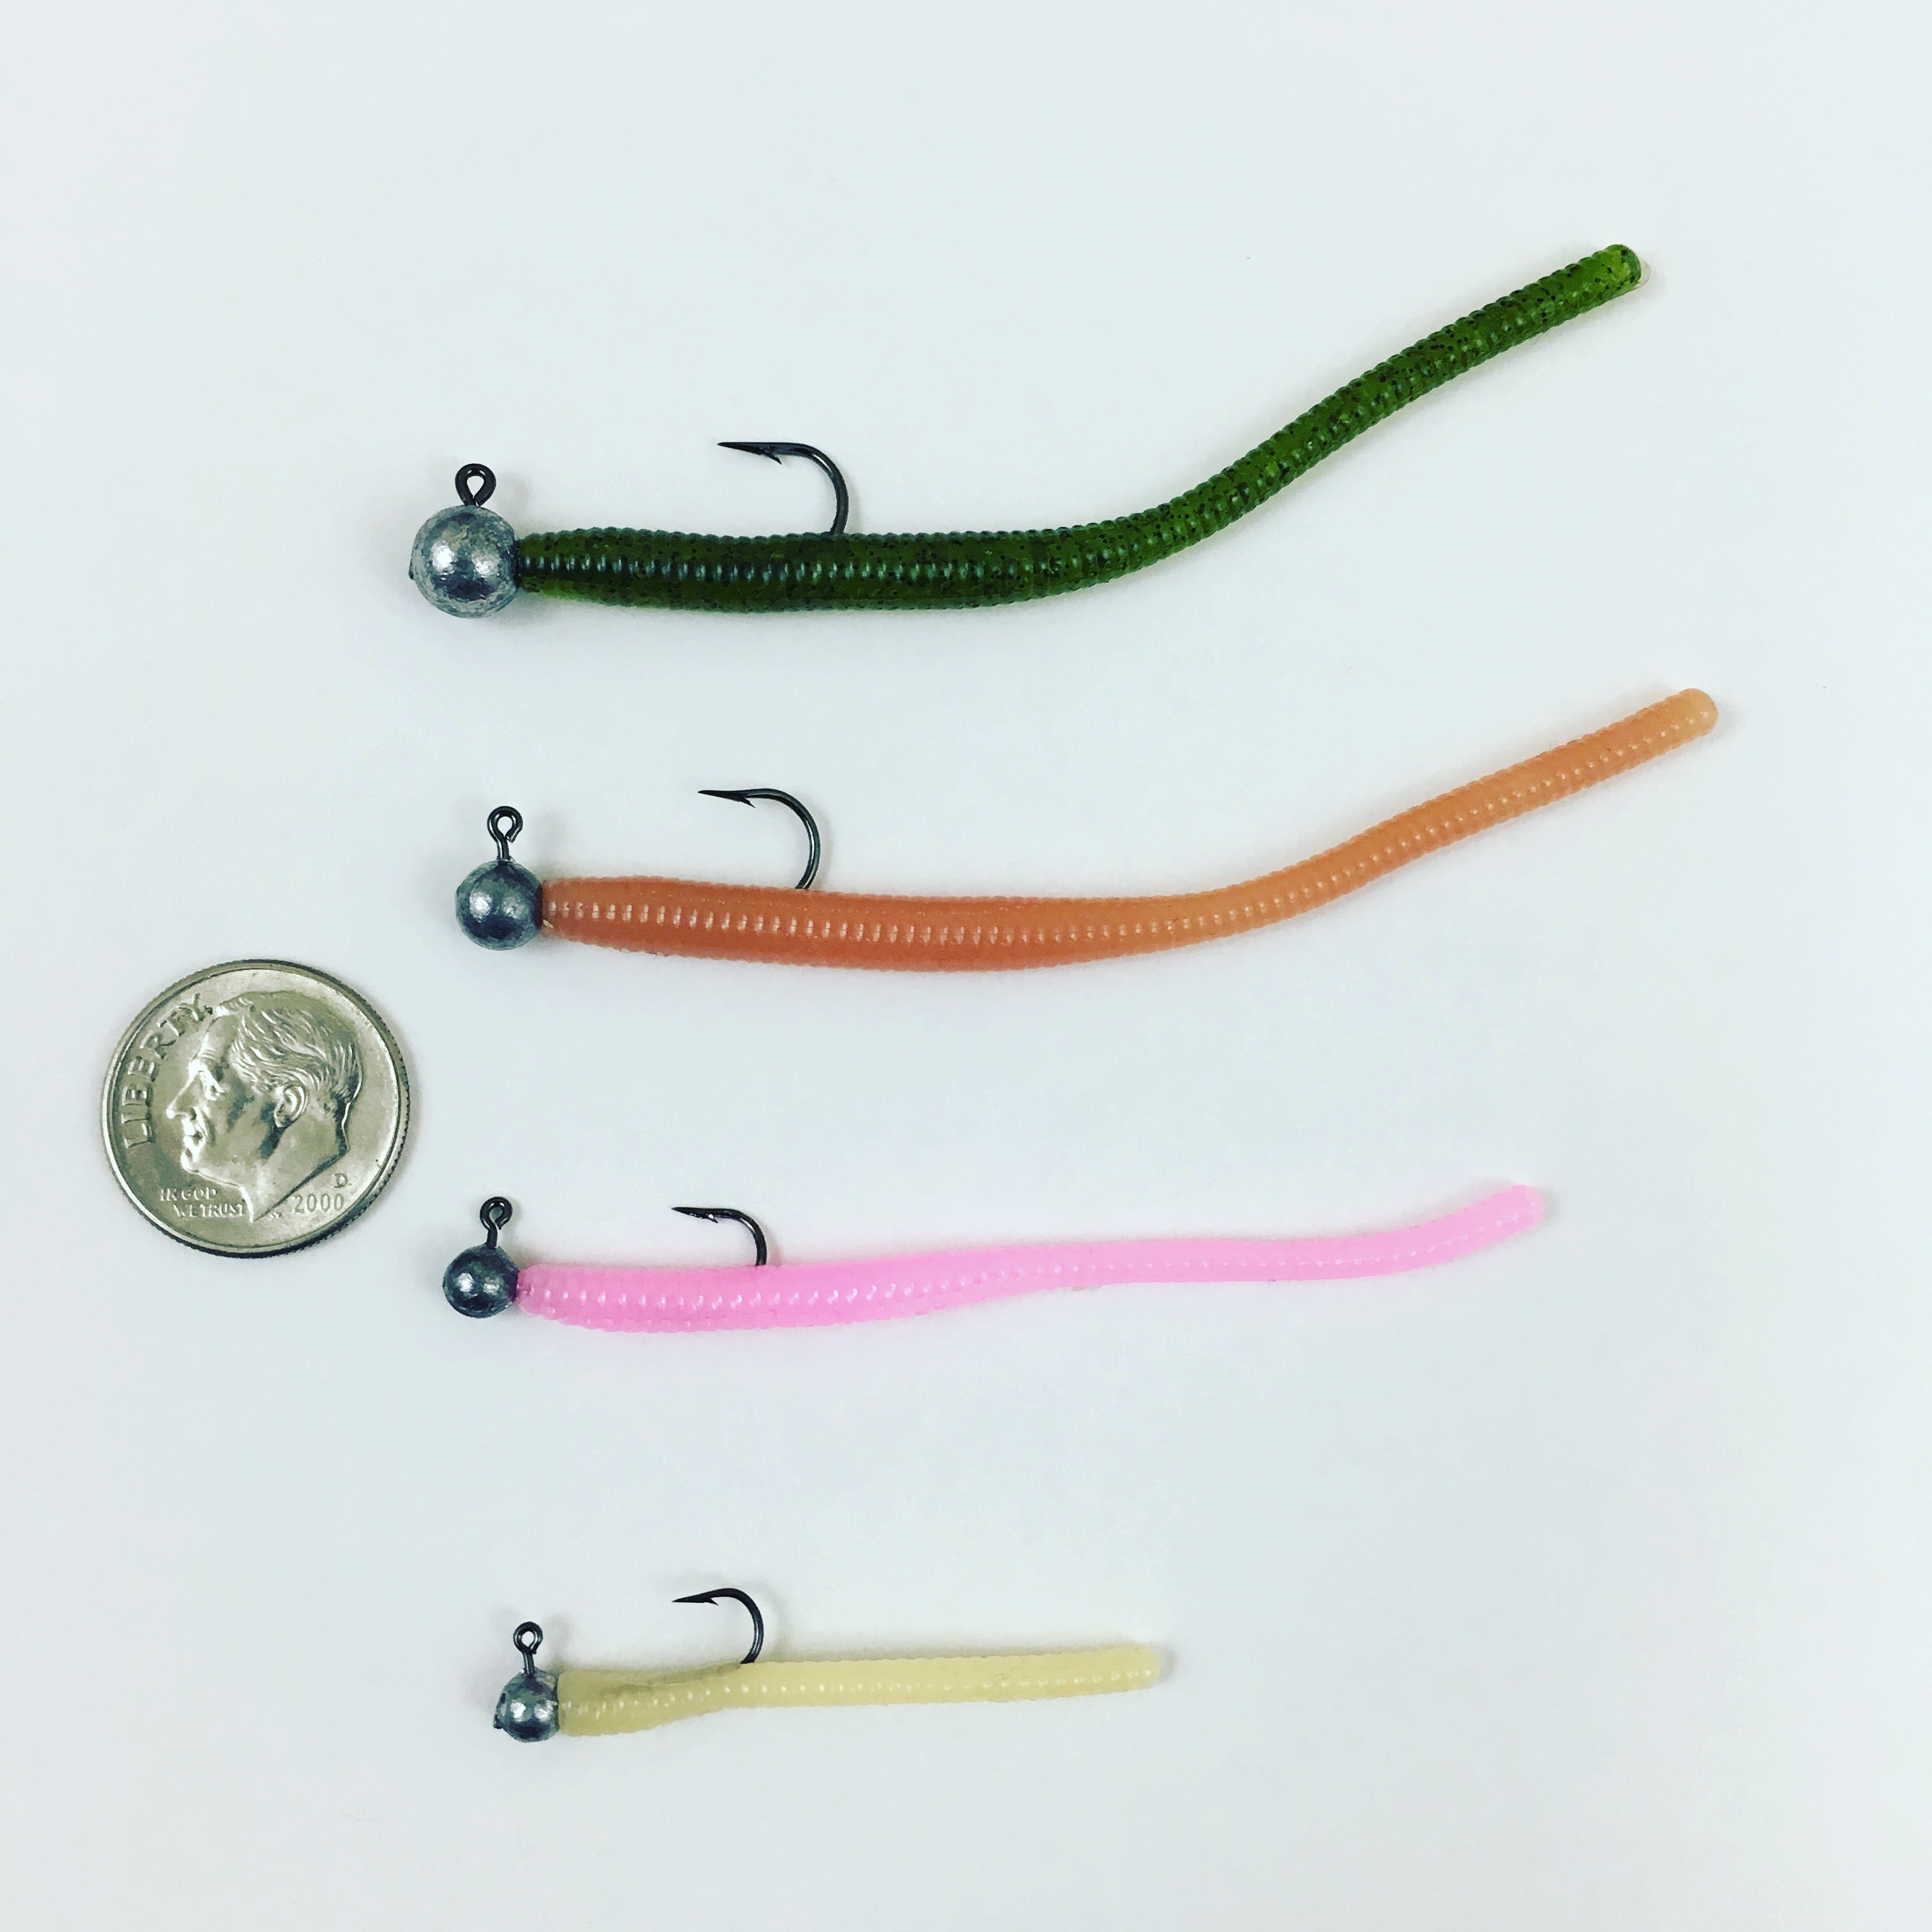 Trout Worm with Egg: Salmon Egg/Bubblegum Pink – Peter's Custom